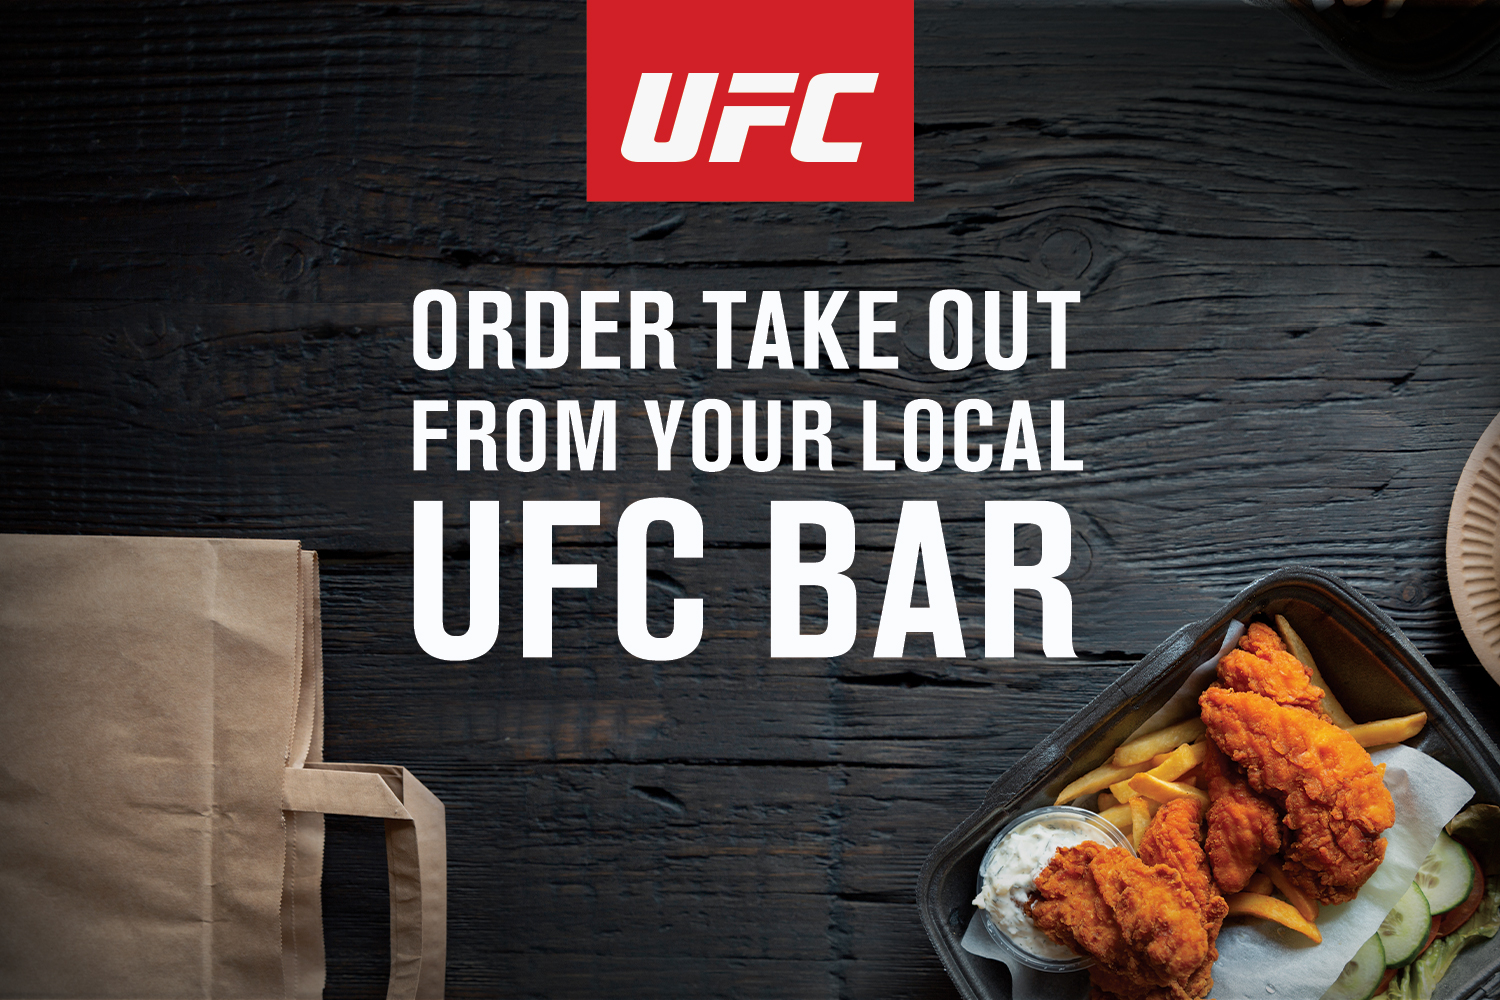 Visit UFC Bars for Takeout Options